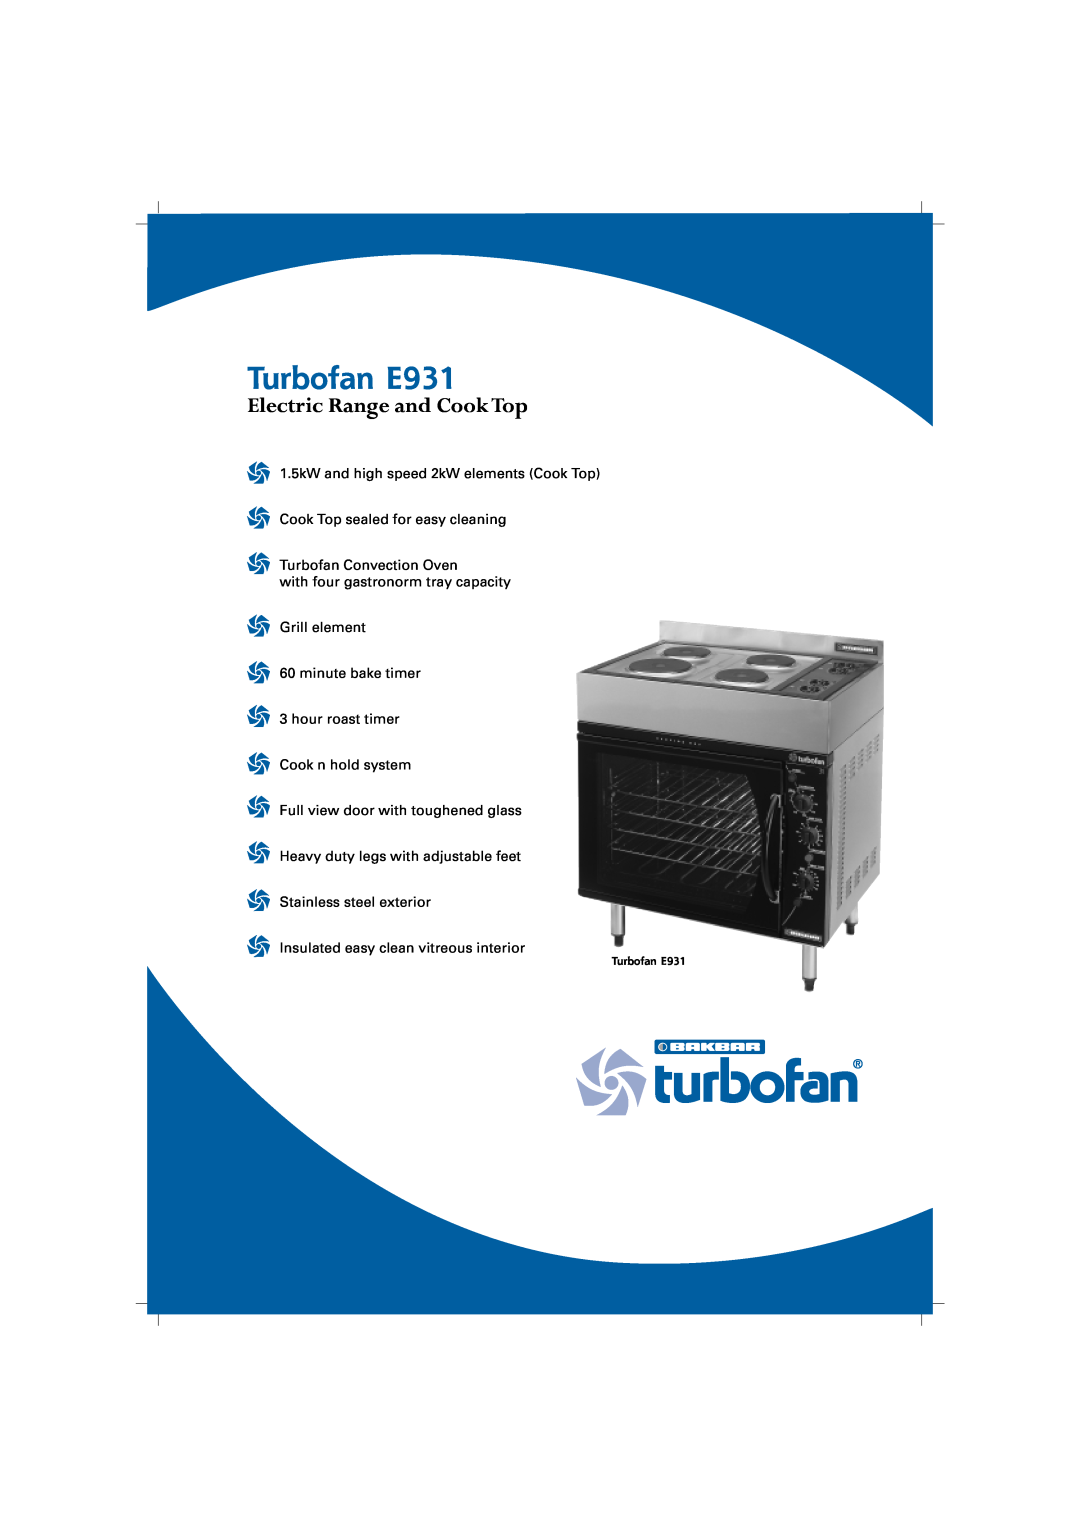 Moffat manual Turbofan E931, Electric Range and Cook Top, 1.5kW and high speed 2kW elements Cook Top 